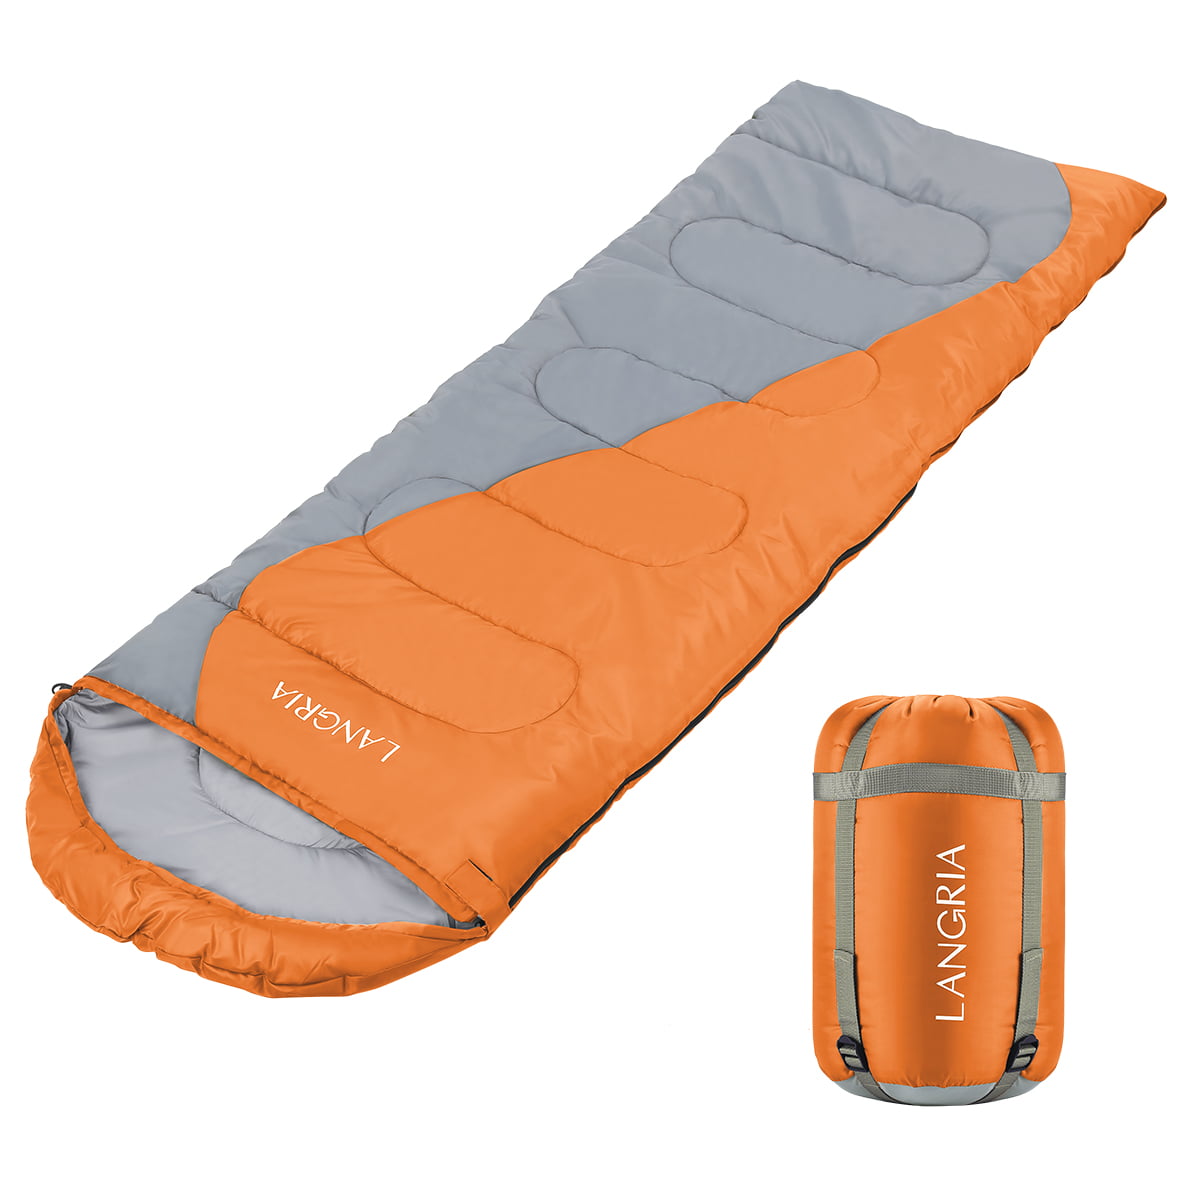 Sleeping Bag- PortableComfort Lightweight WaterproofEnvelopeSleep BagwithCompression Sack SINGLE Great For 4 Season Traveling Camping & Outdoor Activities. Hiking 